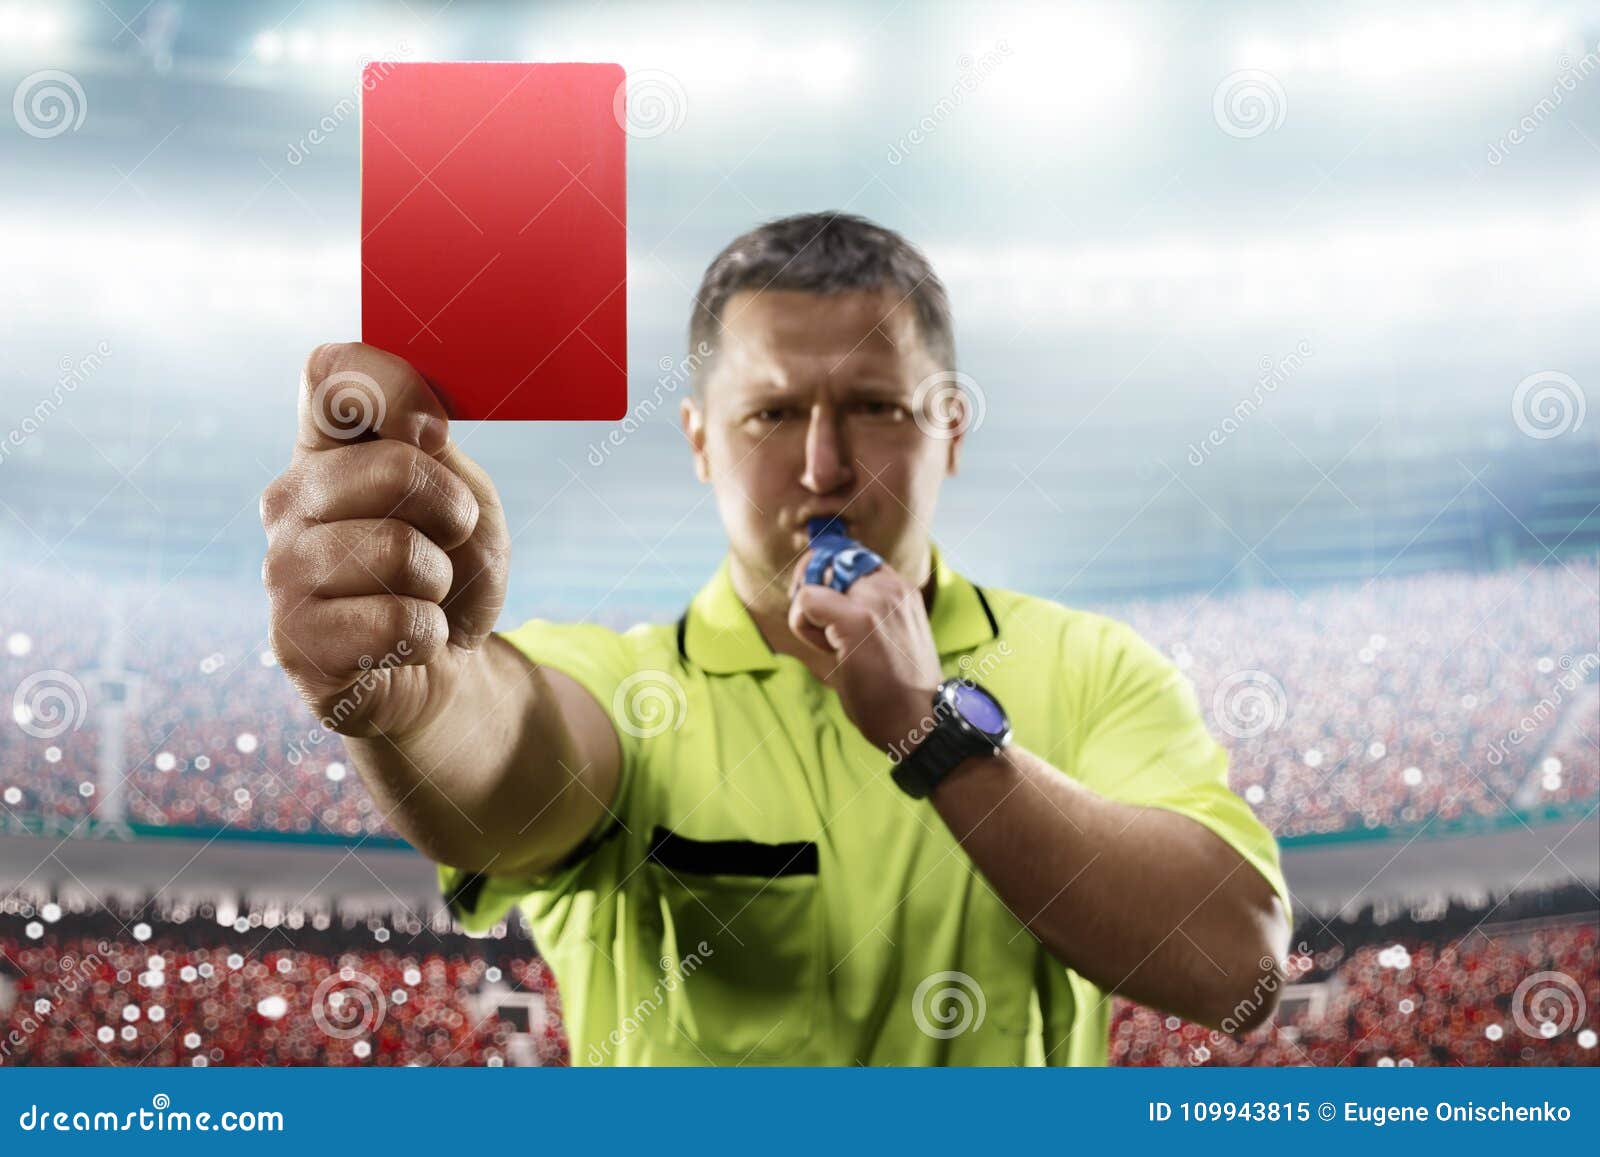 1,641 Referee Red Card Photos - Free Royalty-Free Stock Photos from Dreamstime